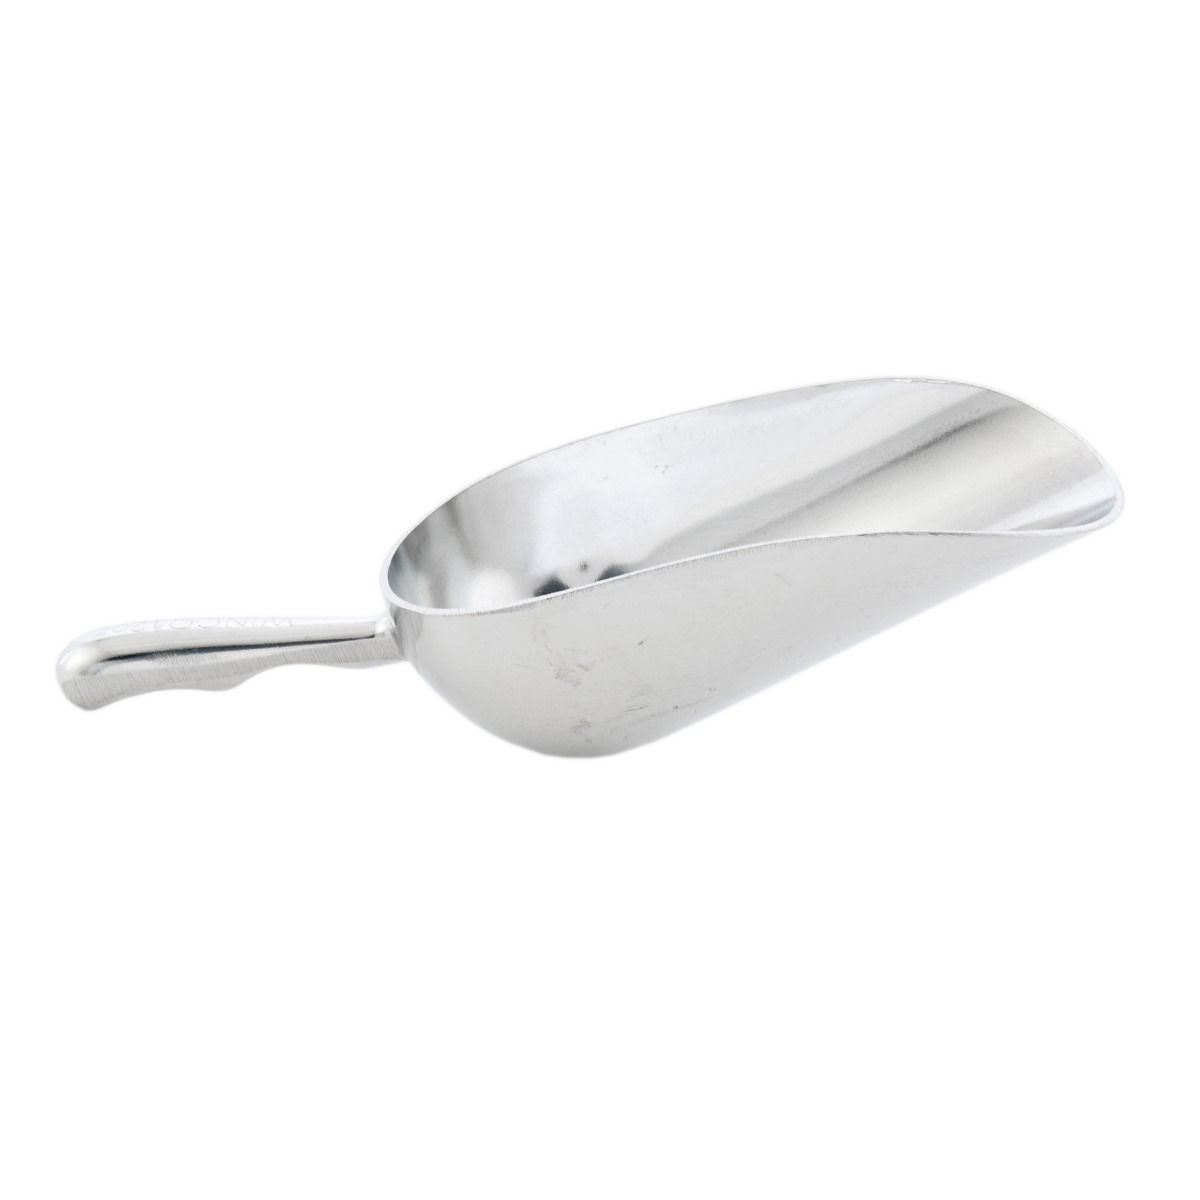 Winco (is-4) 4 oz. Stainless Steel Ice Scoop